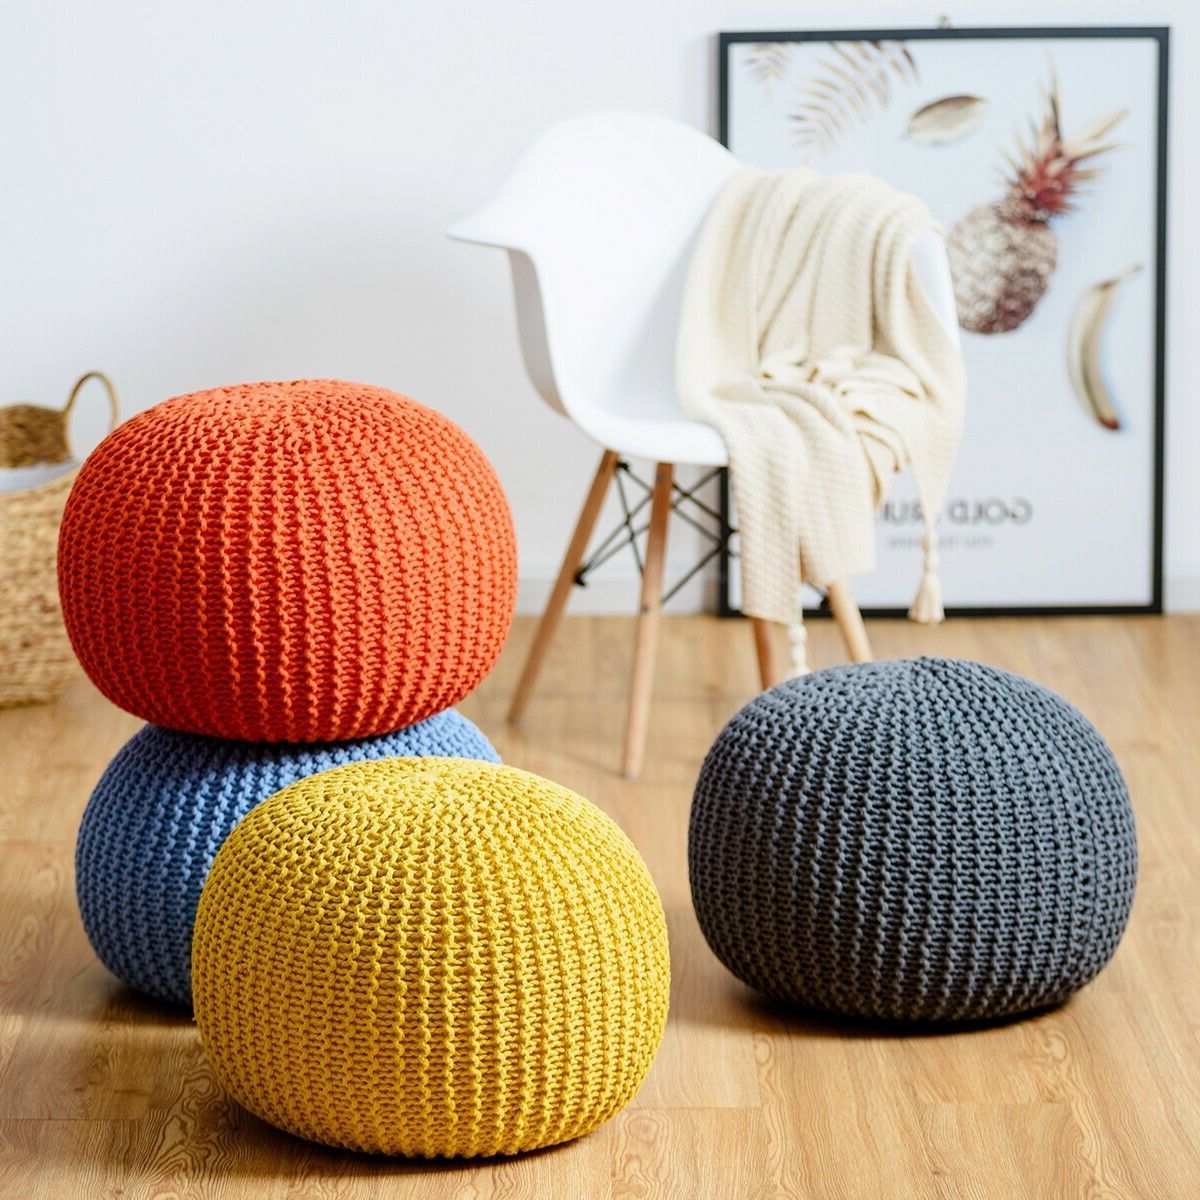 [%100% Cotton Hand Knitted Pouf Floor Seating Ottoman | Floor Seating Regarding Widely Used Cream Cotton Knitted Pouf Ottomans|cream Cotton Knitted Pouf Ottomans Pertaining To Well Known 100% Cotton Hand Knitted Pouf Floor Seating Ottoman | Floor Seating|well Known Cream Cotton Knitted Pouf Ottomans Inside 100% Cotton Hand Knitted Pouf Floor Seating Ottoman | Floor Seating|well Liked 100% Cotton Hand Knitted Pouf Floor Seating Ottoman | Floor Seating Throughout Cream Cotton Knitted Pouf Ottomans%] (View 3 of 10)